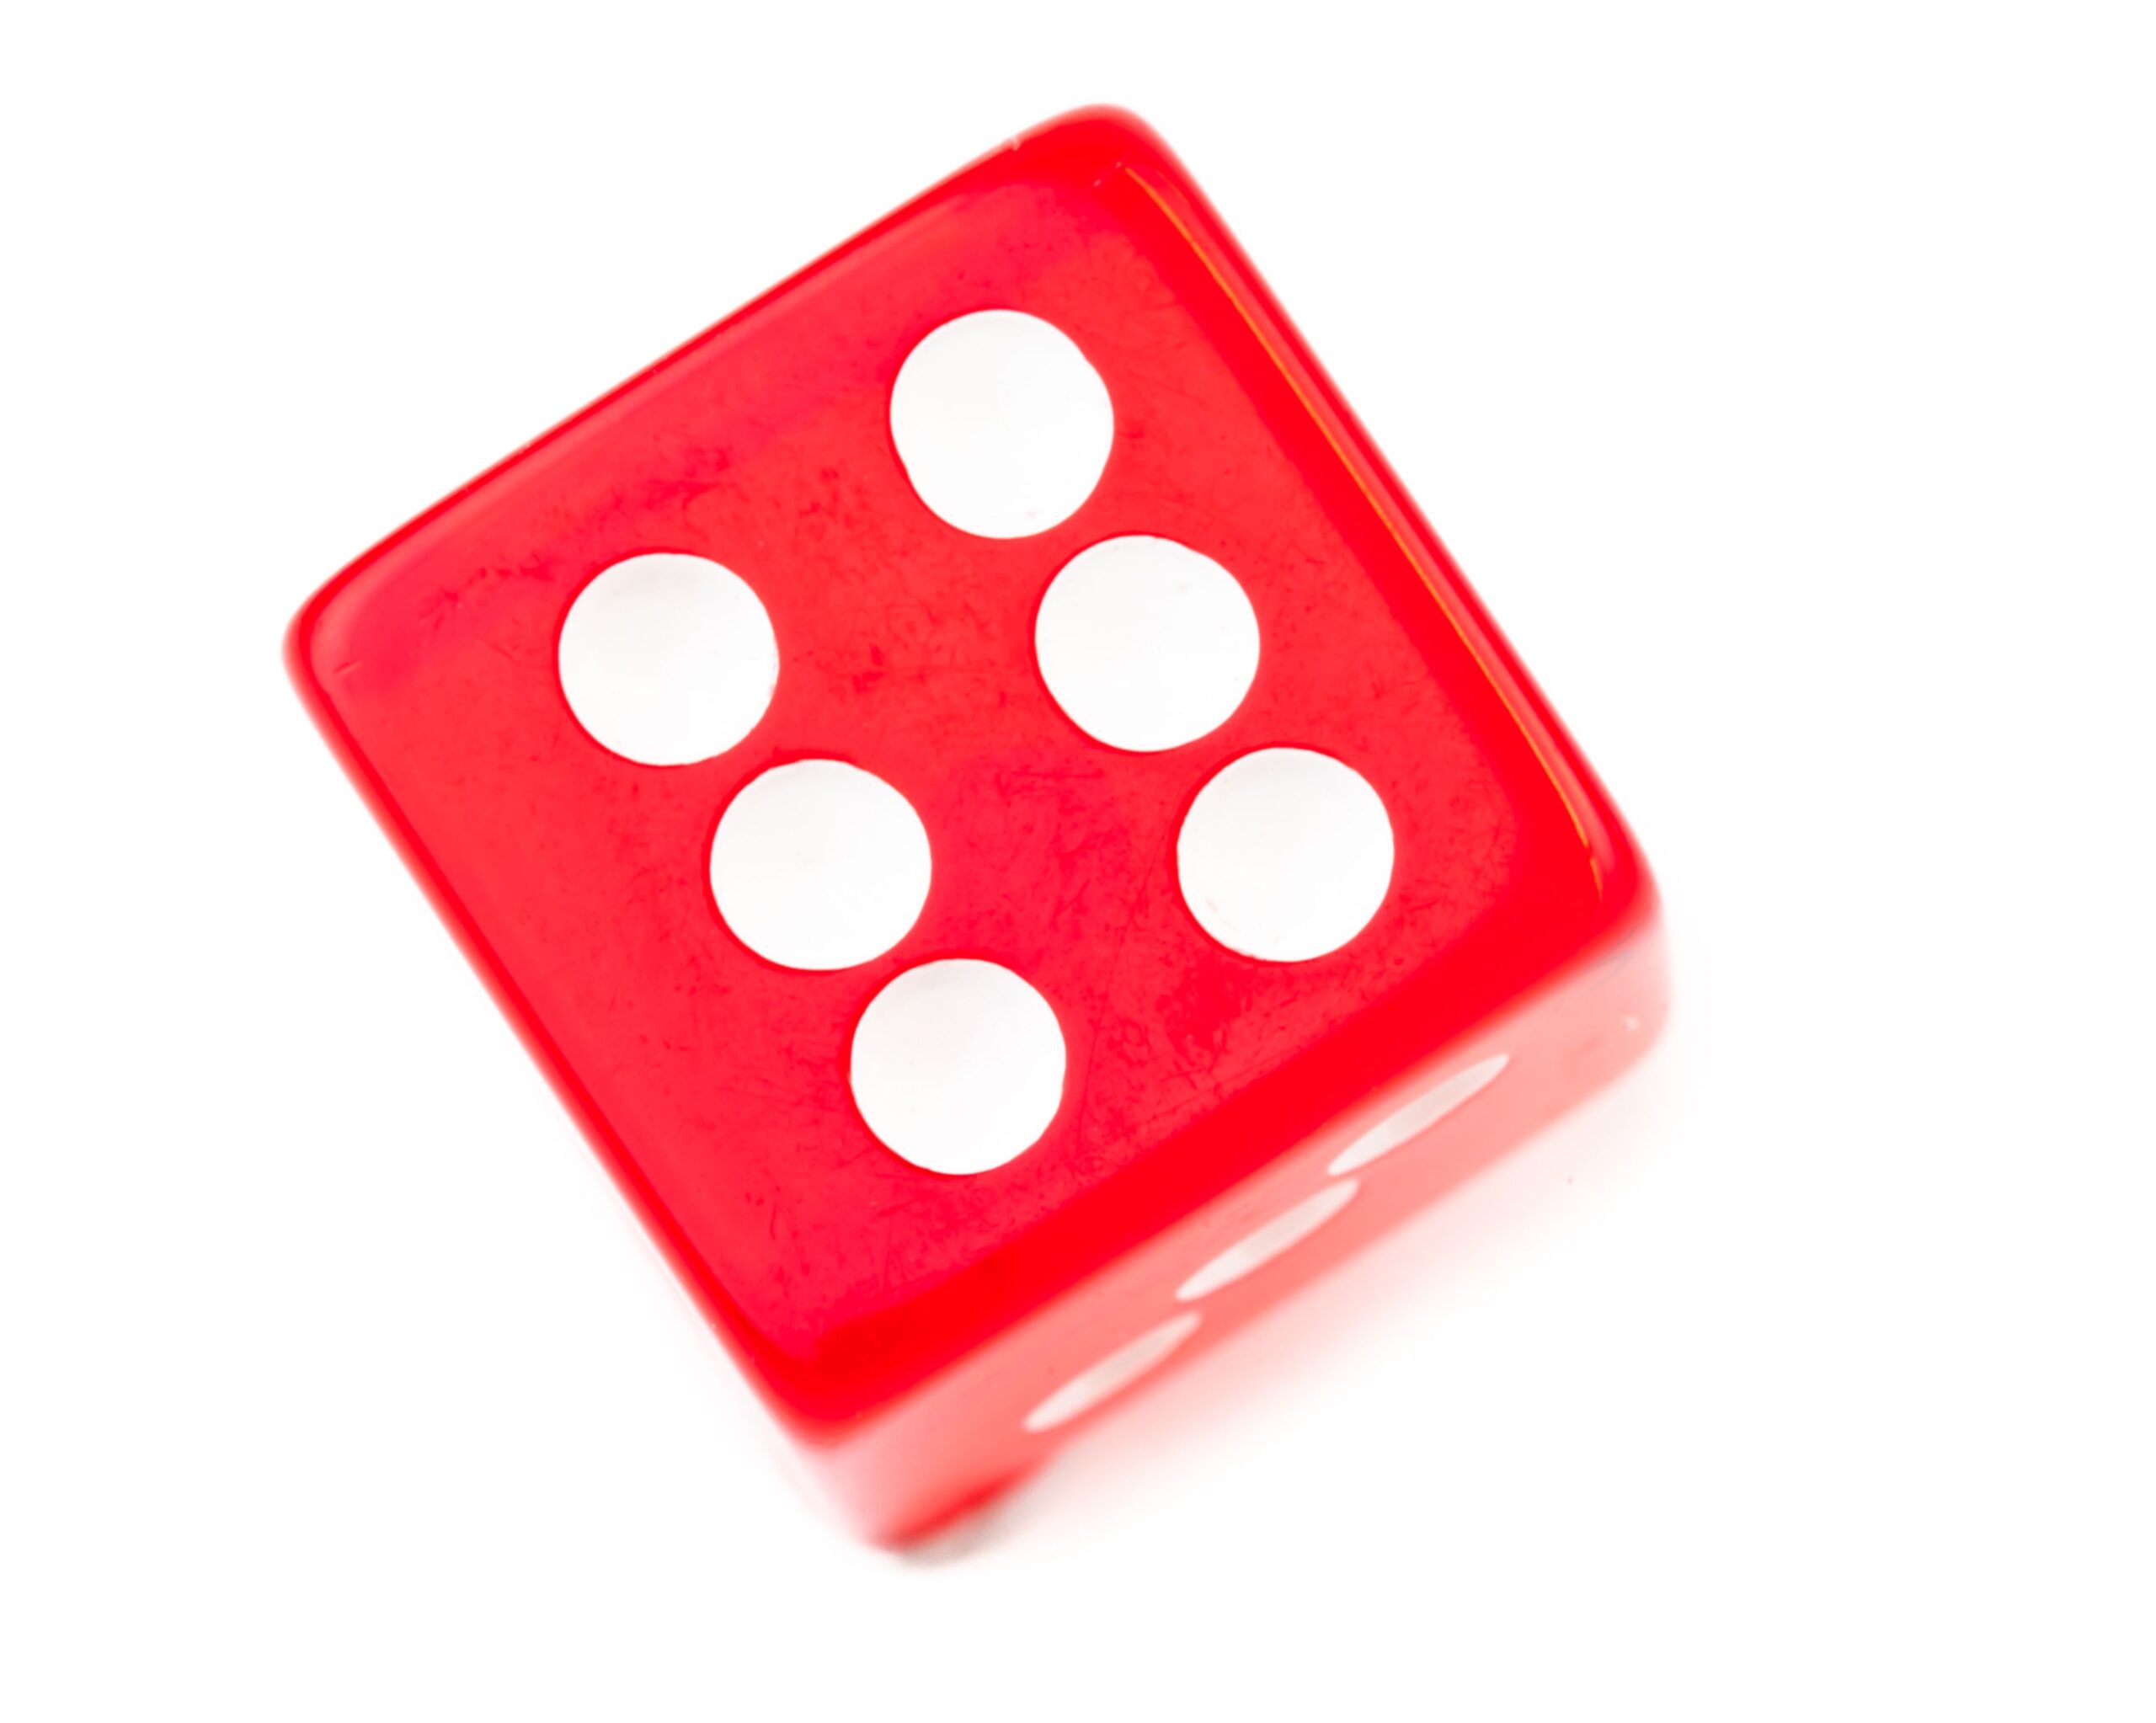 Red dice against a white background